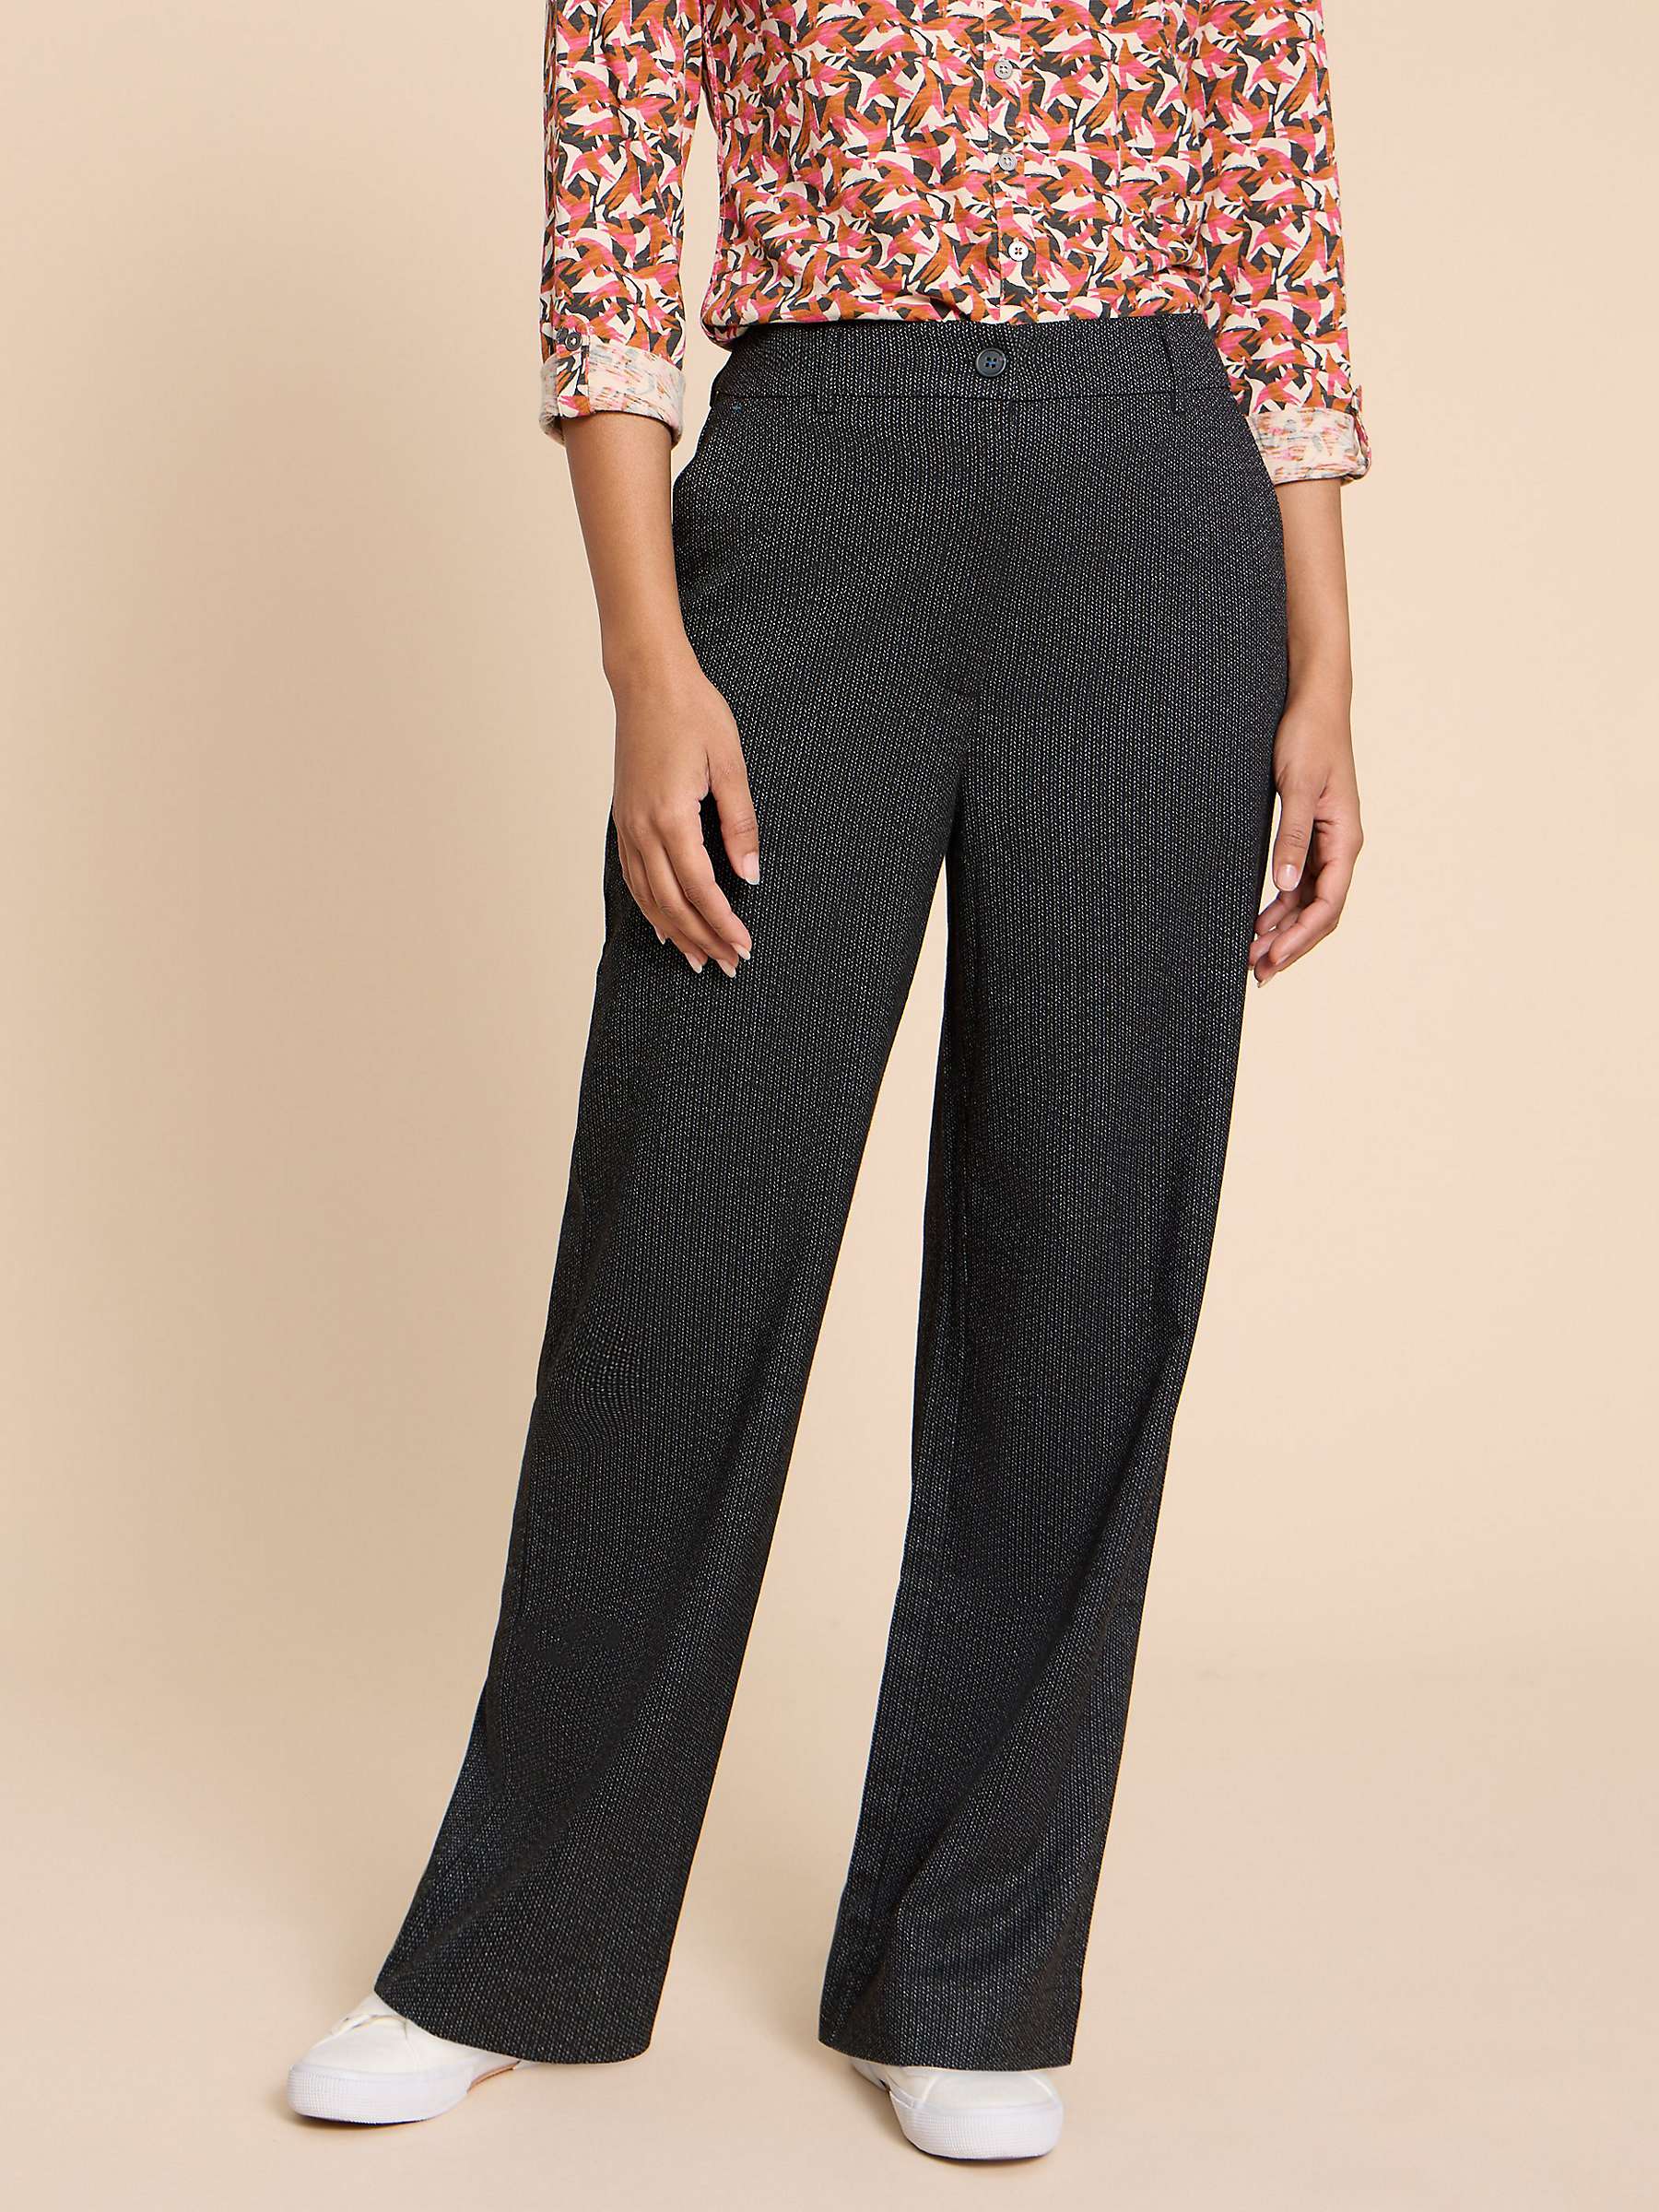 Buy White Stuff Wide Leg Trousers Online at johnlewis.com